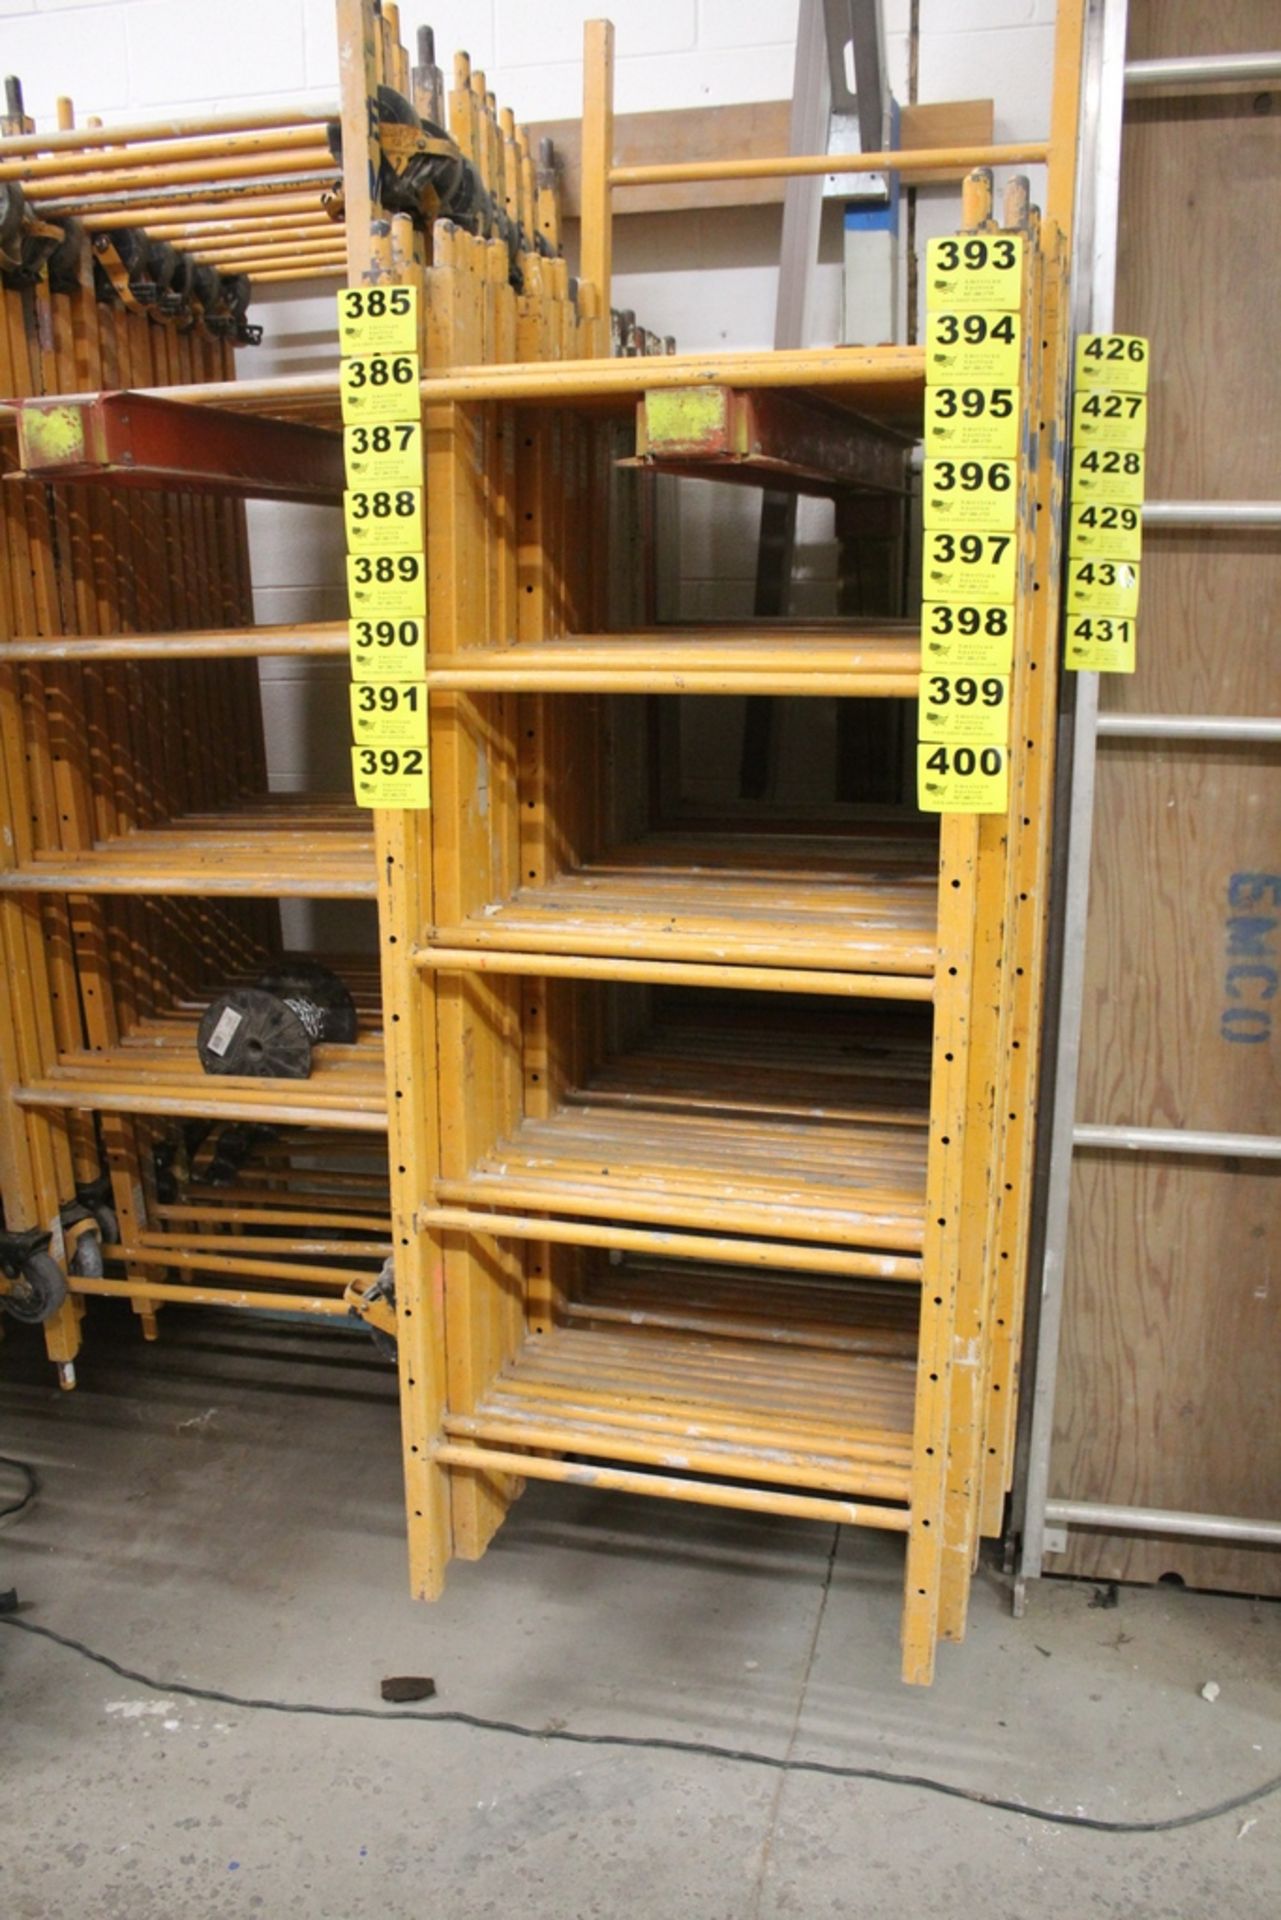 (2) PERRY SCAFFOLD 5-RUNG END FRAMES / LADDERS